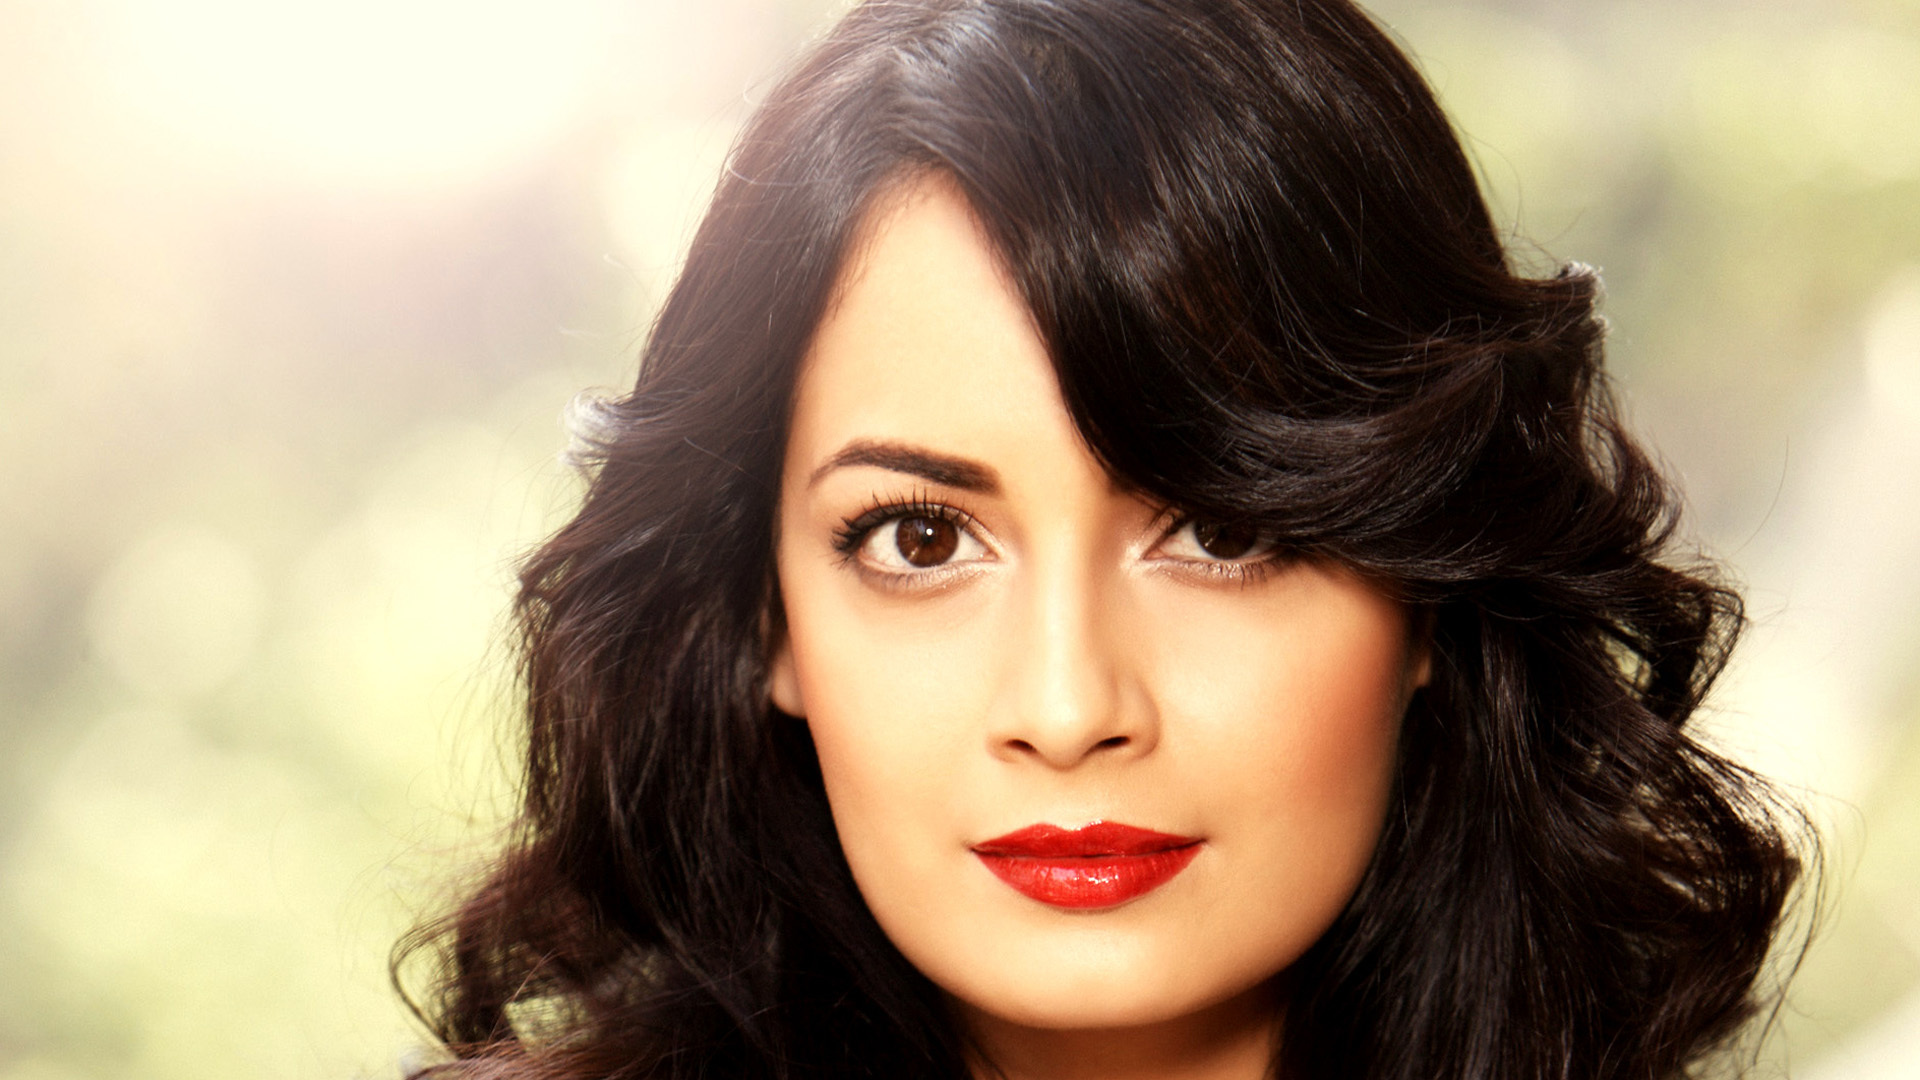 Dia Dia Mirza Wallpapers Images Photos Pictures Backgrounds Dia - Vrogue